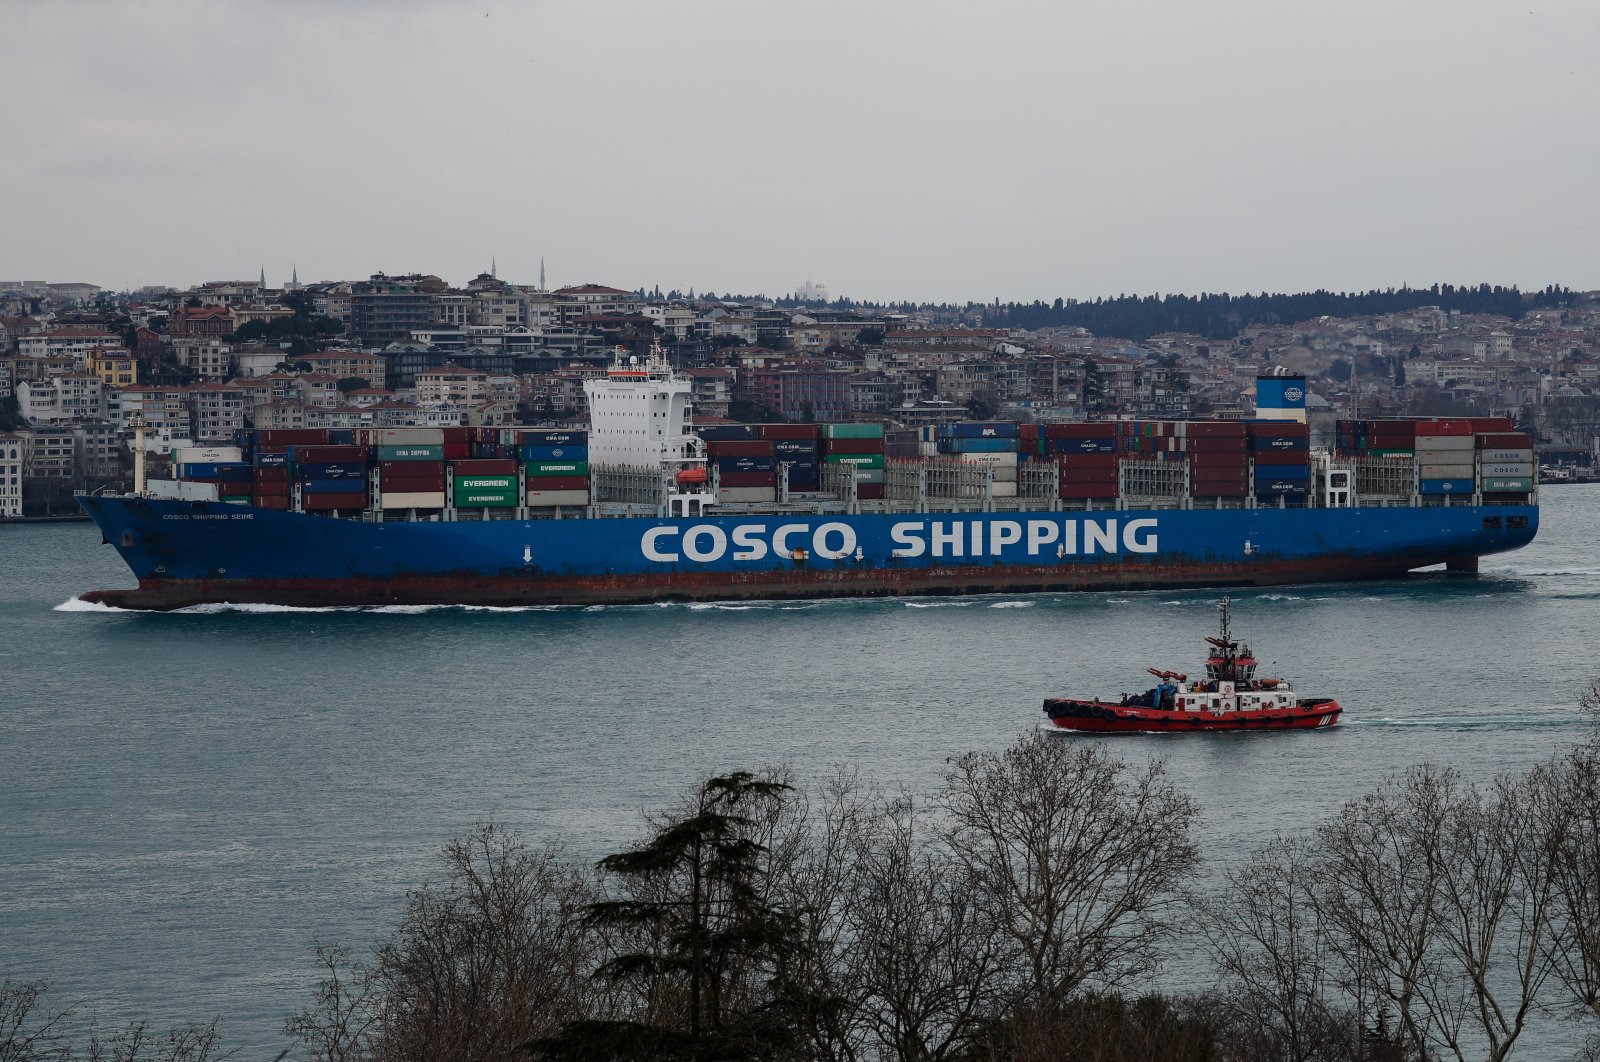 The Cosco Shipping Seine container ship of the China Ocean Shipping Company (COSCO), sails in the Bosporus on its way to the Black Sea, Istanbul, Turkey, March 3, 2022. (Reuters Photo)